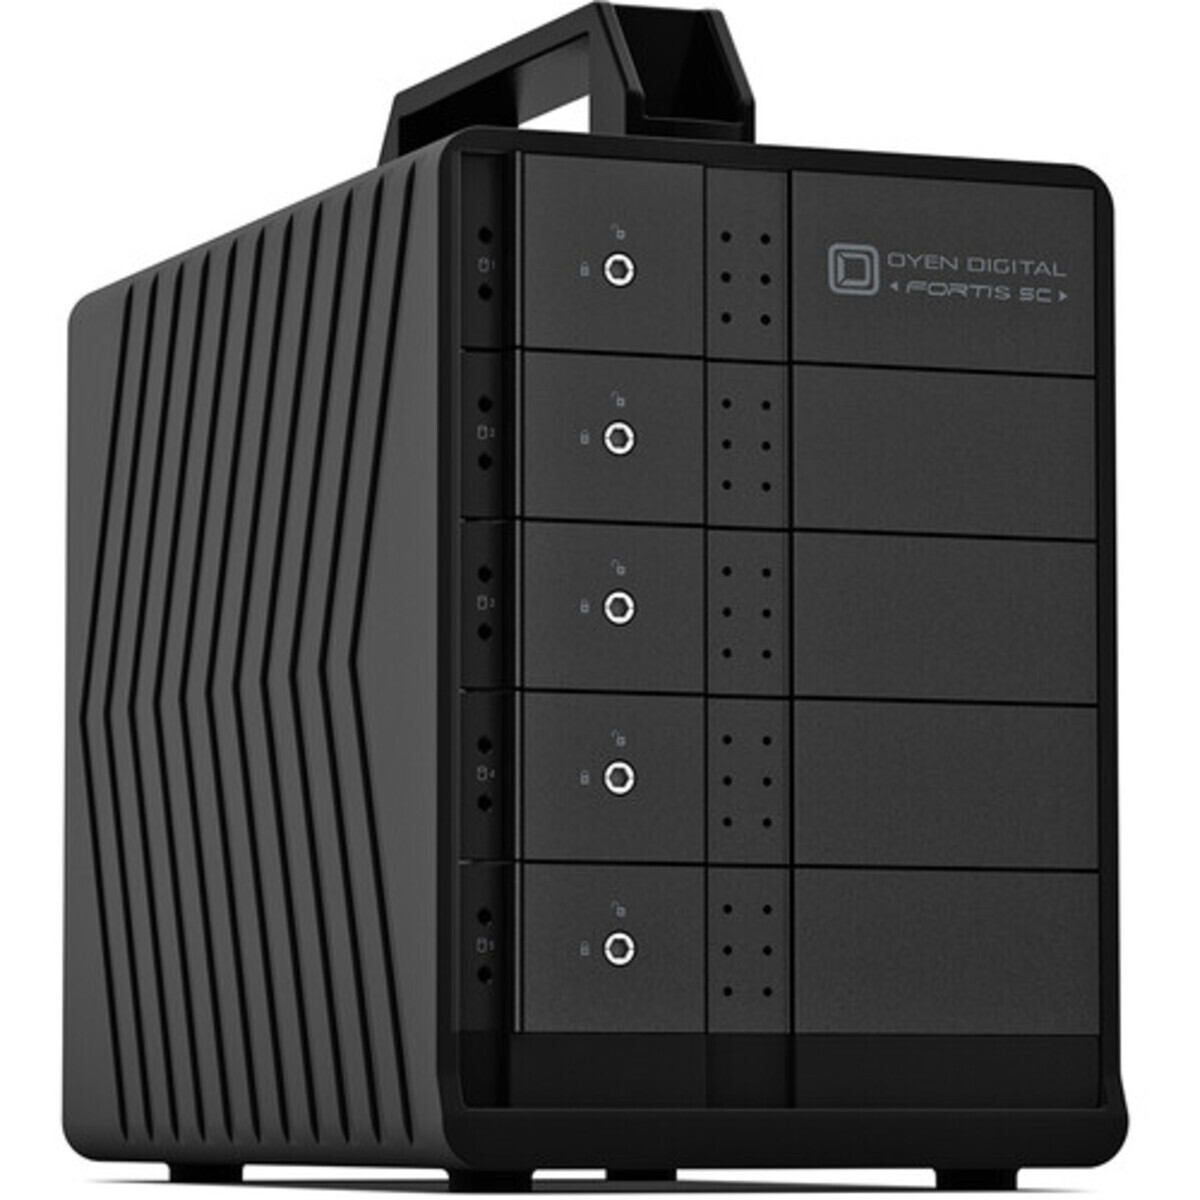 buy OYEN Fortis 5C 80tb Desktop DAS - Direct Attached Storage Device 5x16000gb Western Digital Ultrastar DC HC550 WUH721816ALE6L4 3.5 7200rpm SATA 6Gb/s HDD ENTERPRISE Class Drives Installed - Burn-In Tested - nas headquarters buy network attached storage server device das new raid-5 free shipping usa spring sale Fortis 5C